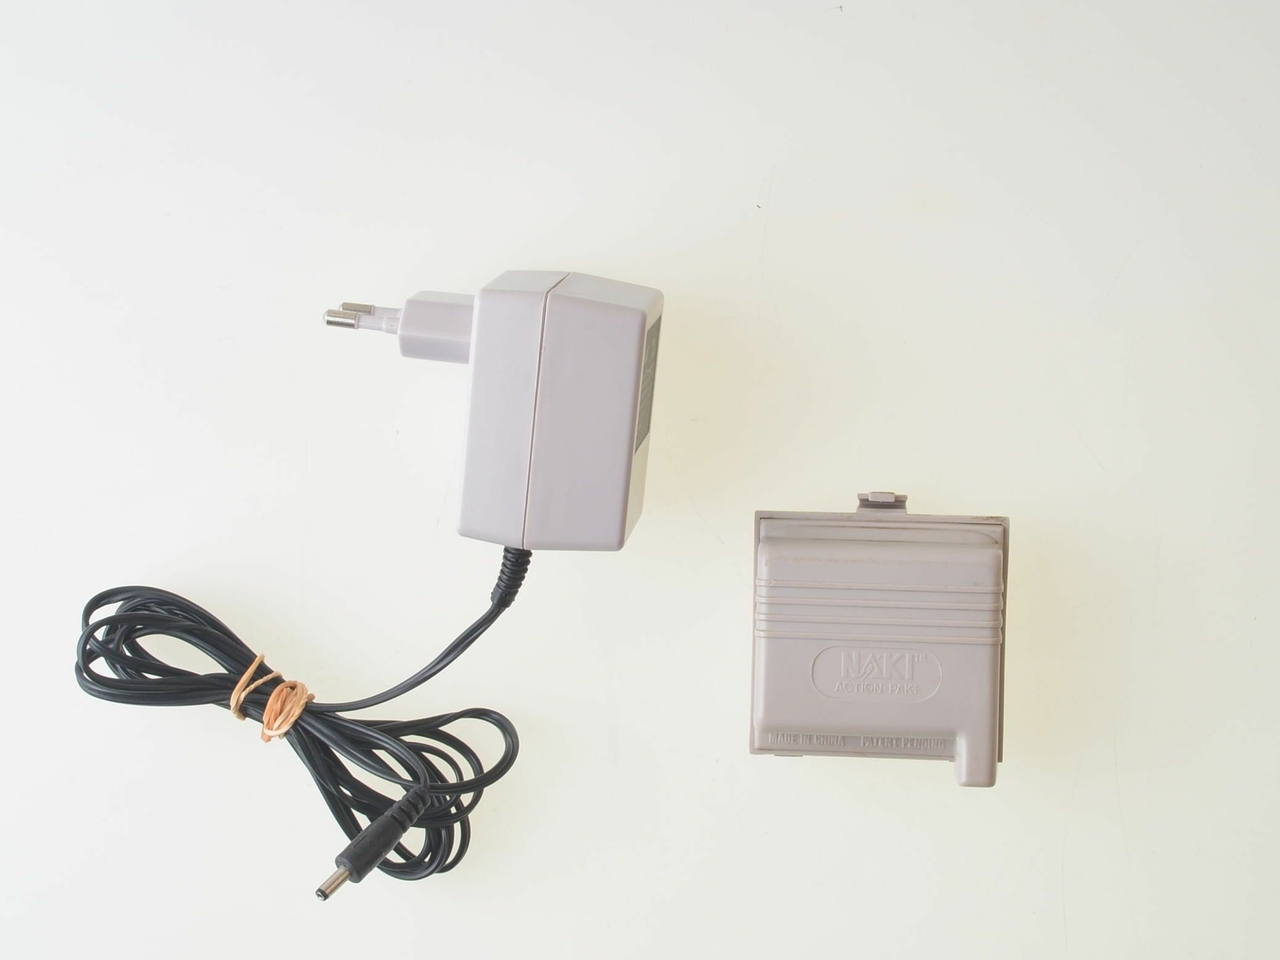 Aftermarket Battery Pack for Gameboy Classic - Gameboy Classic Hardware